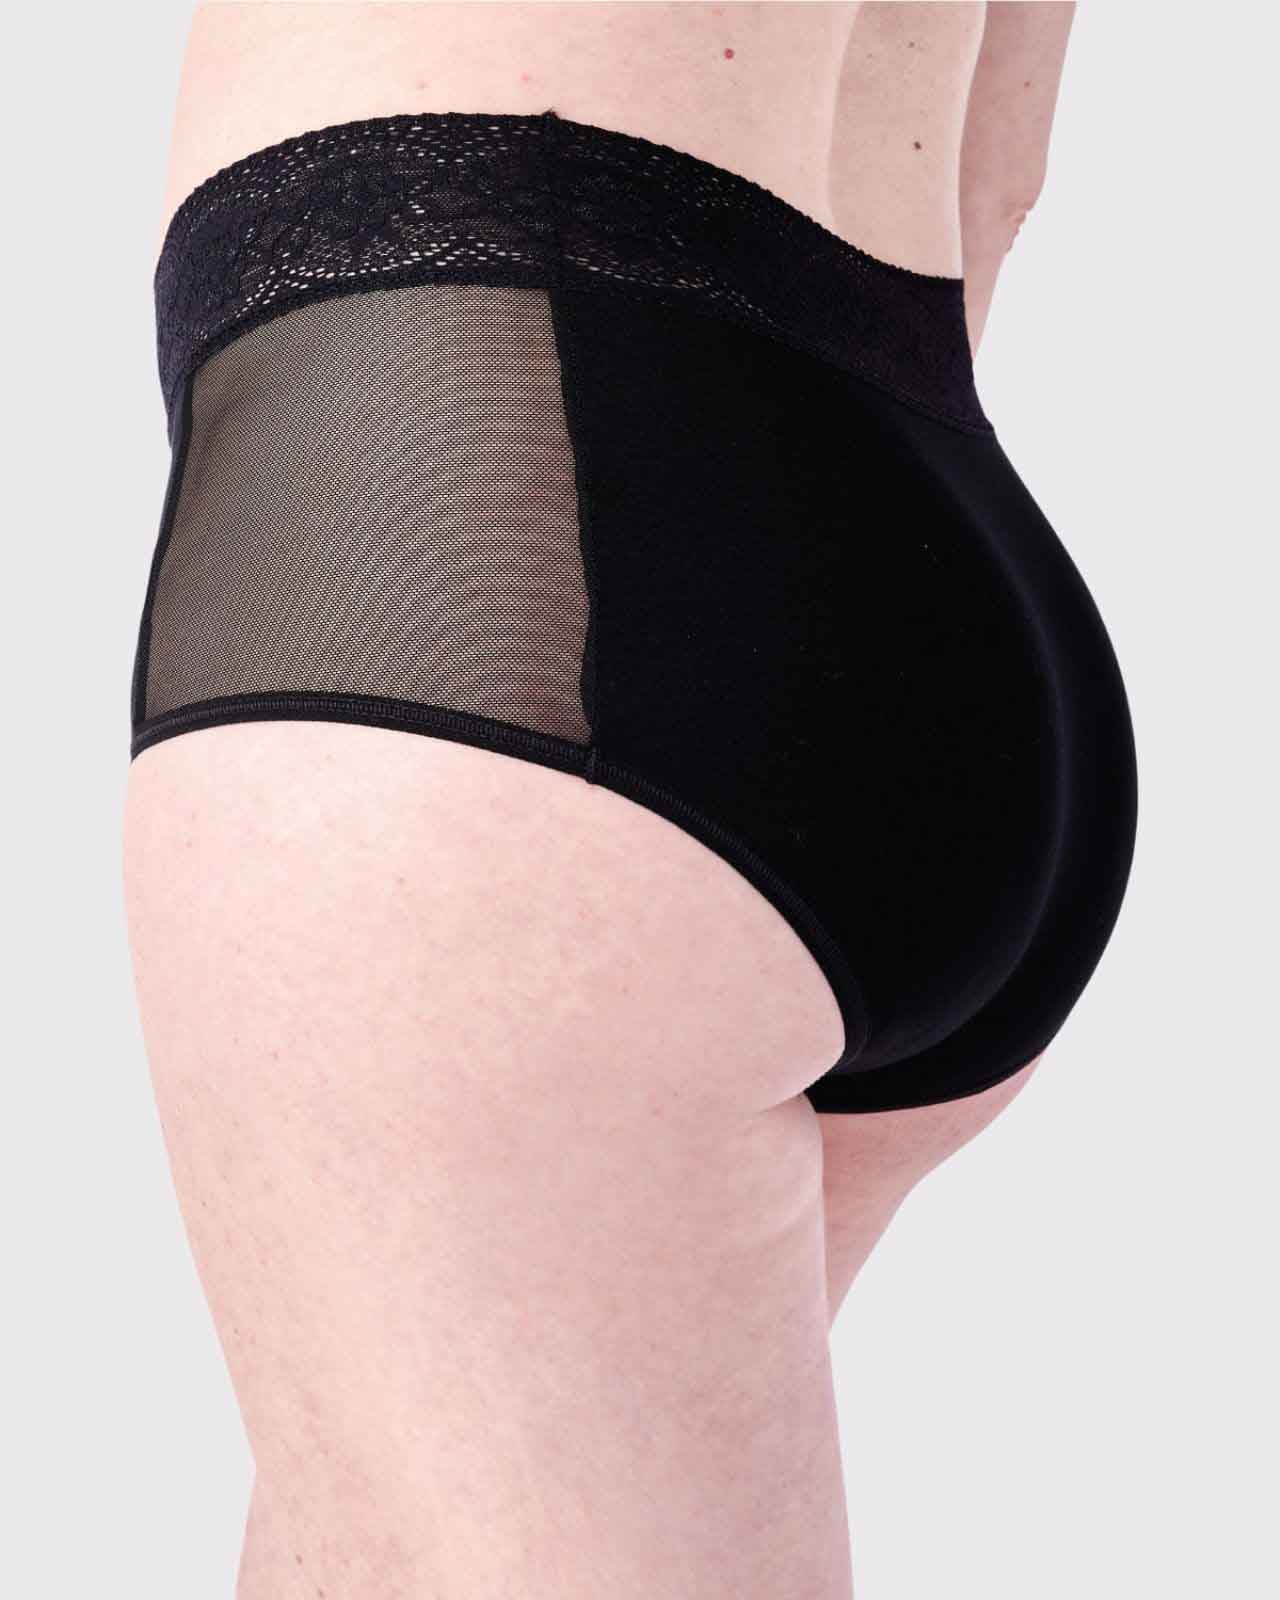 Jeanine Hipster Full Brief By AnaOno - S-XXL